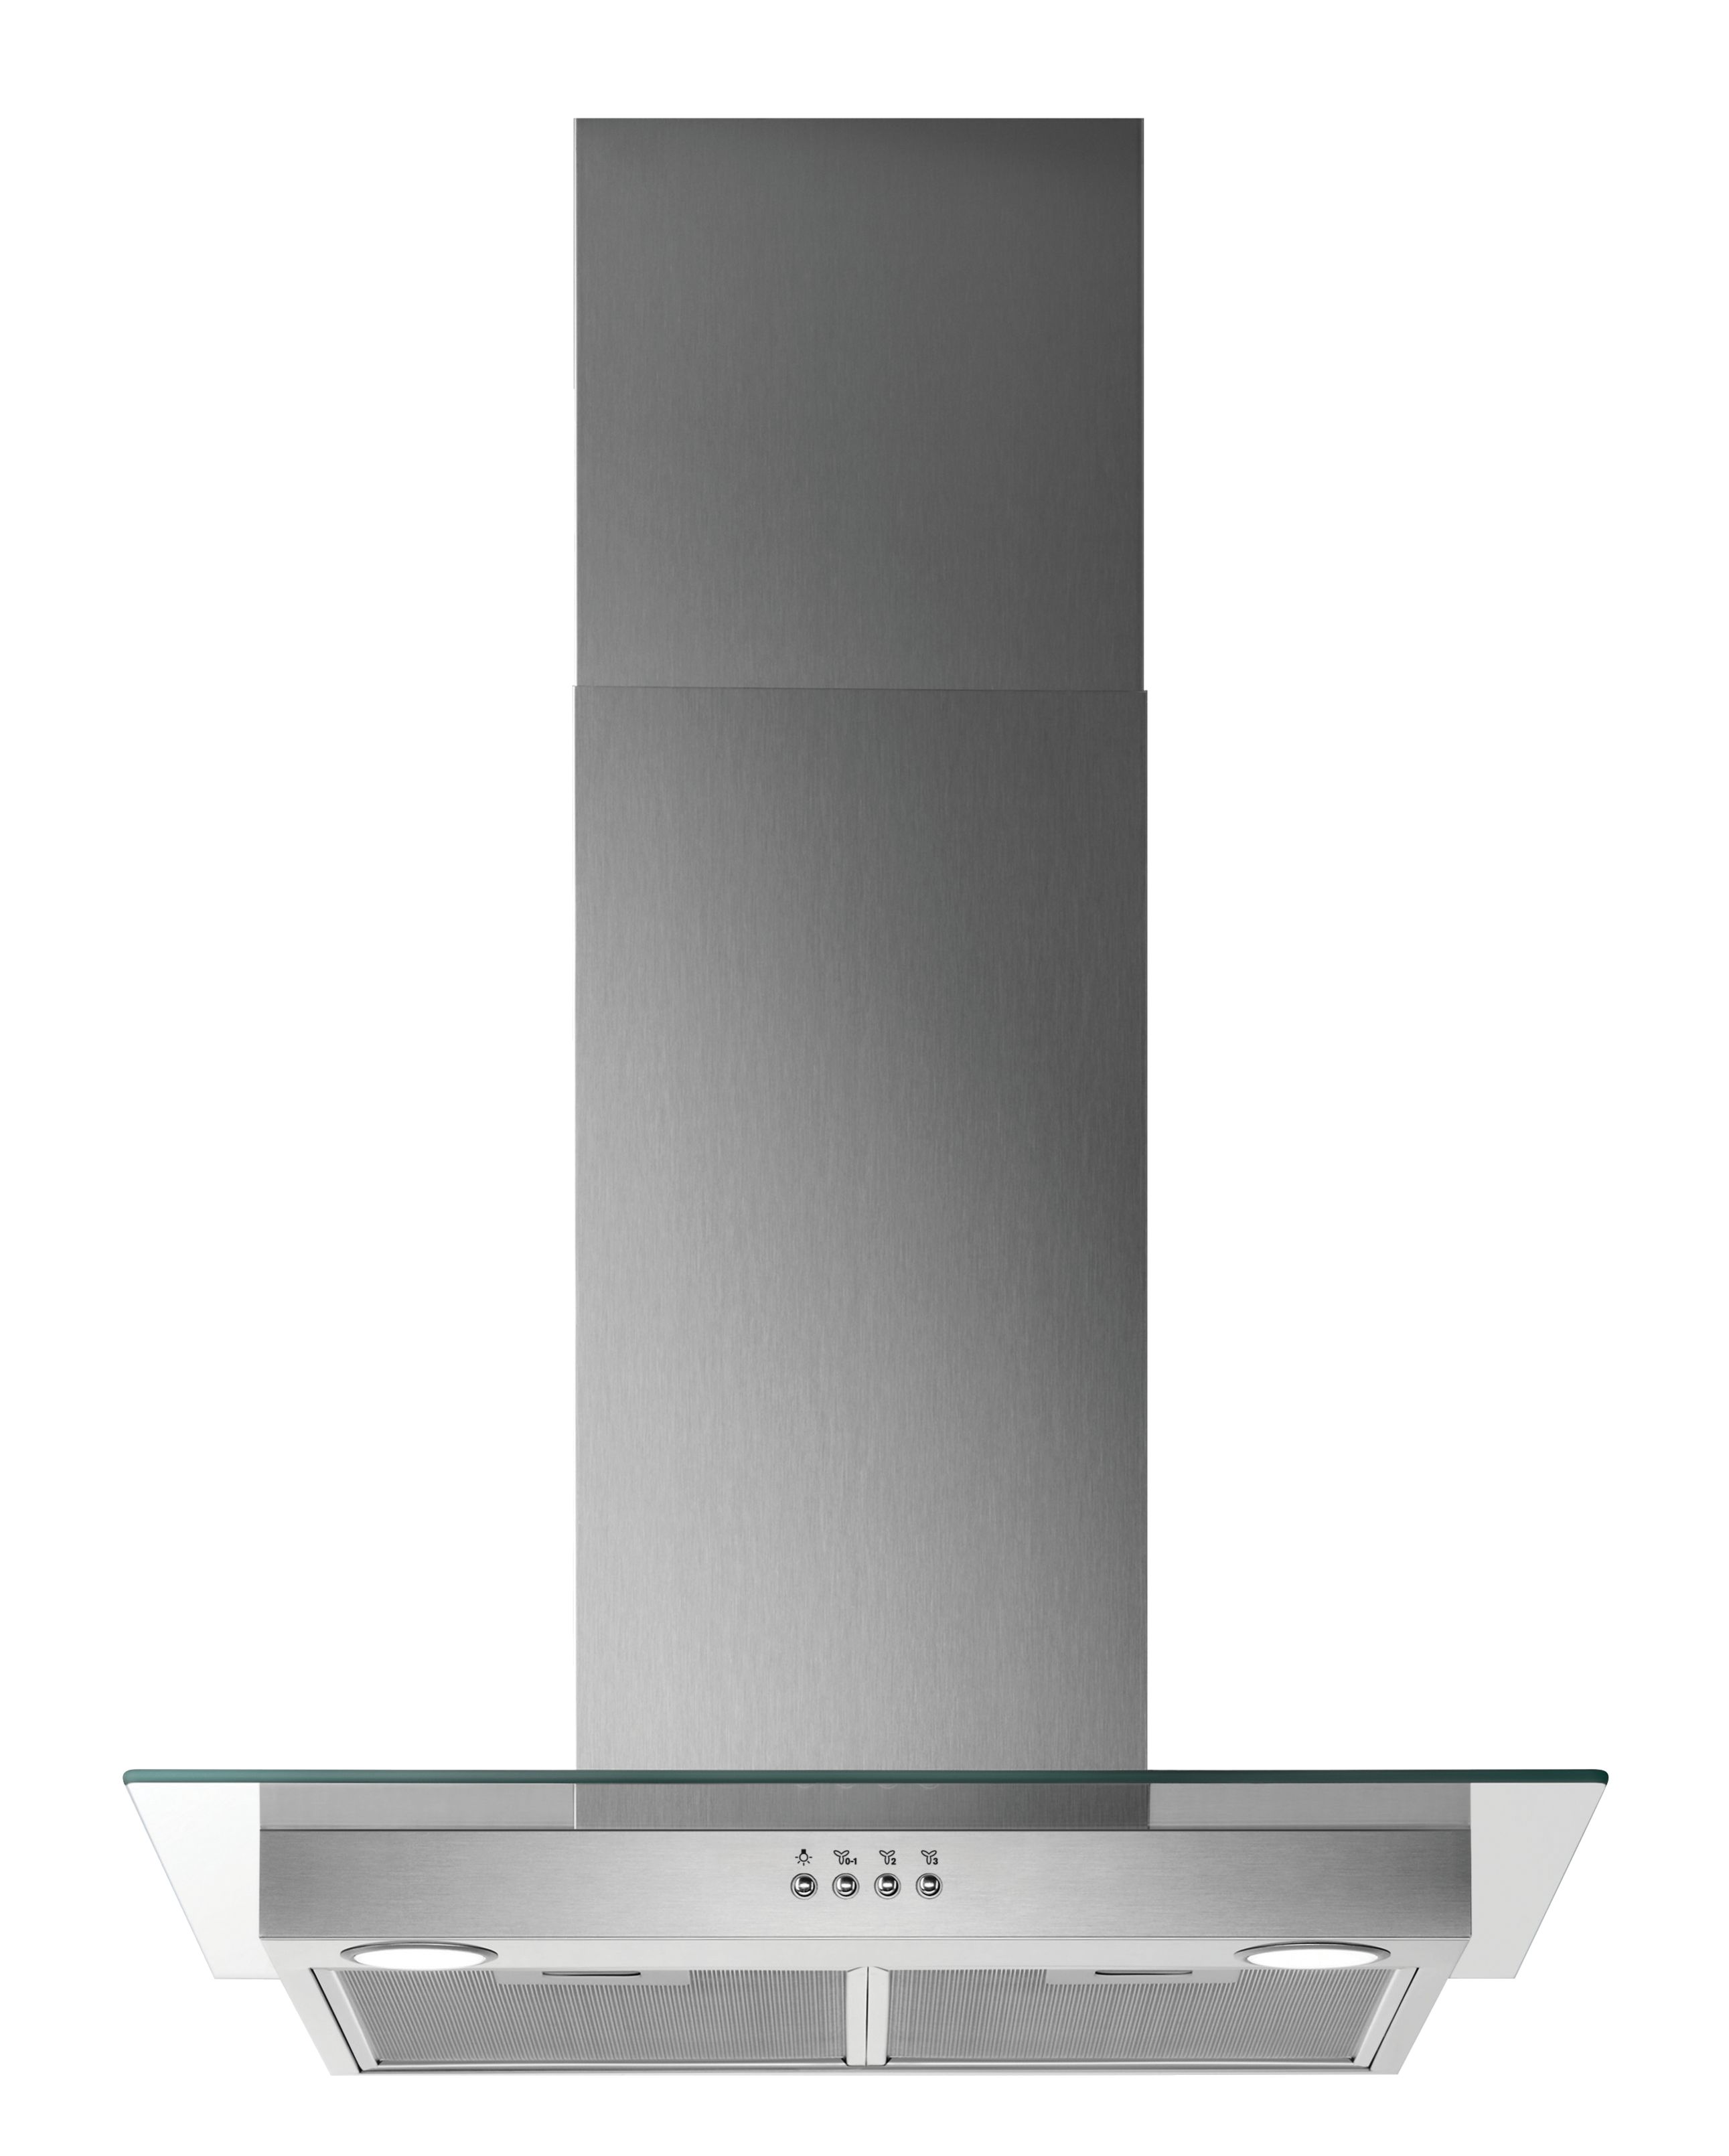 Image of Zanussi ZHC62653XA 60cm Chimney Hood with Glass - Stainless Steel